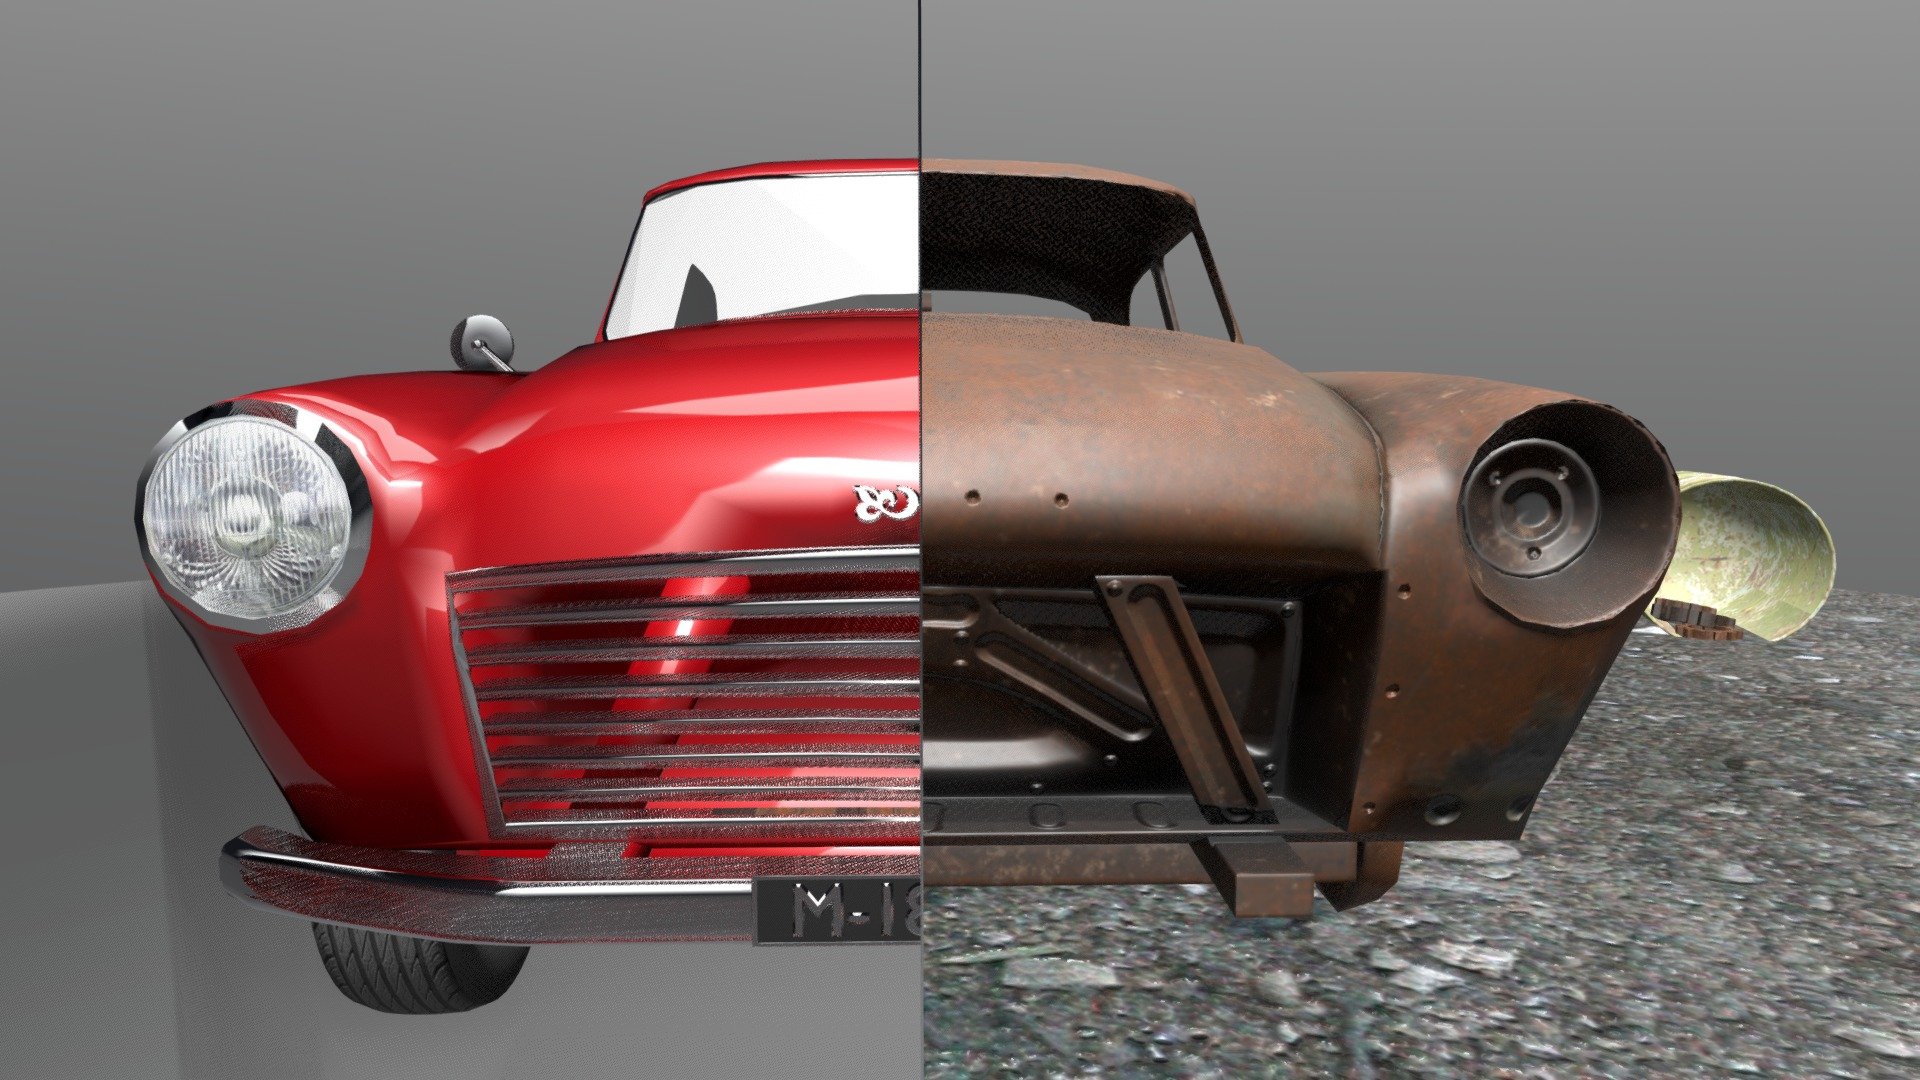 From car of the year 1956 to the scrapheap, this is certainly a fall from grace.

 Use annotations for best result 

This is just a concept inspired by &ldquo;Old Car Wreck